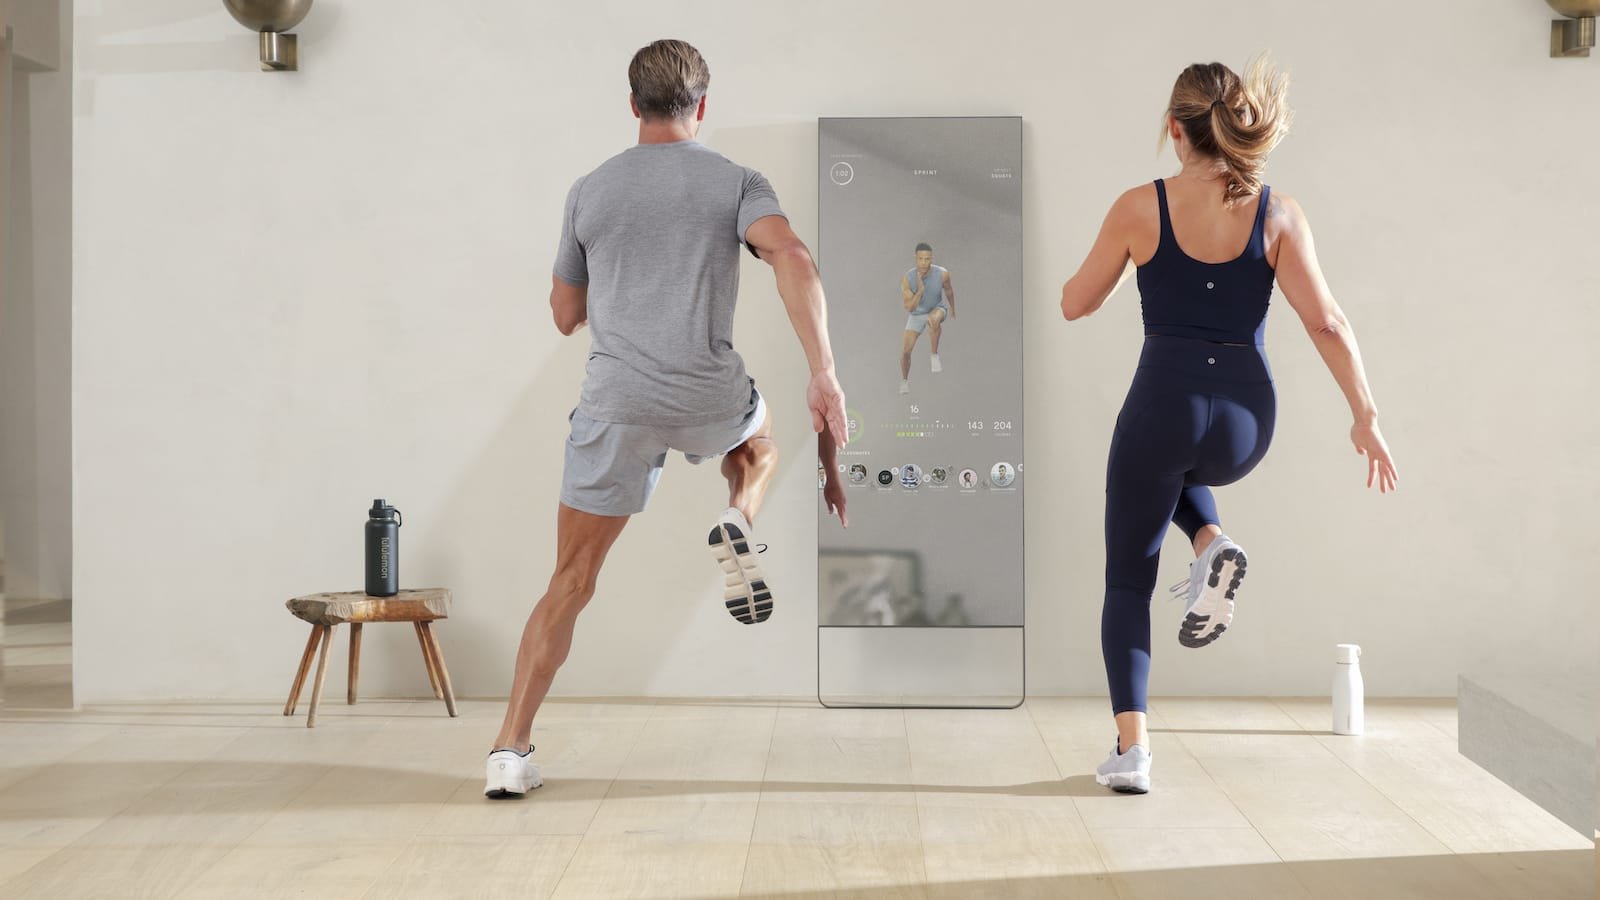 Mirror smart interactive home gym makes it easy to exercise in your living space